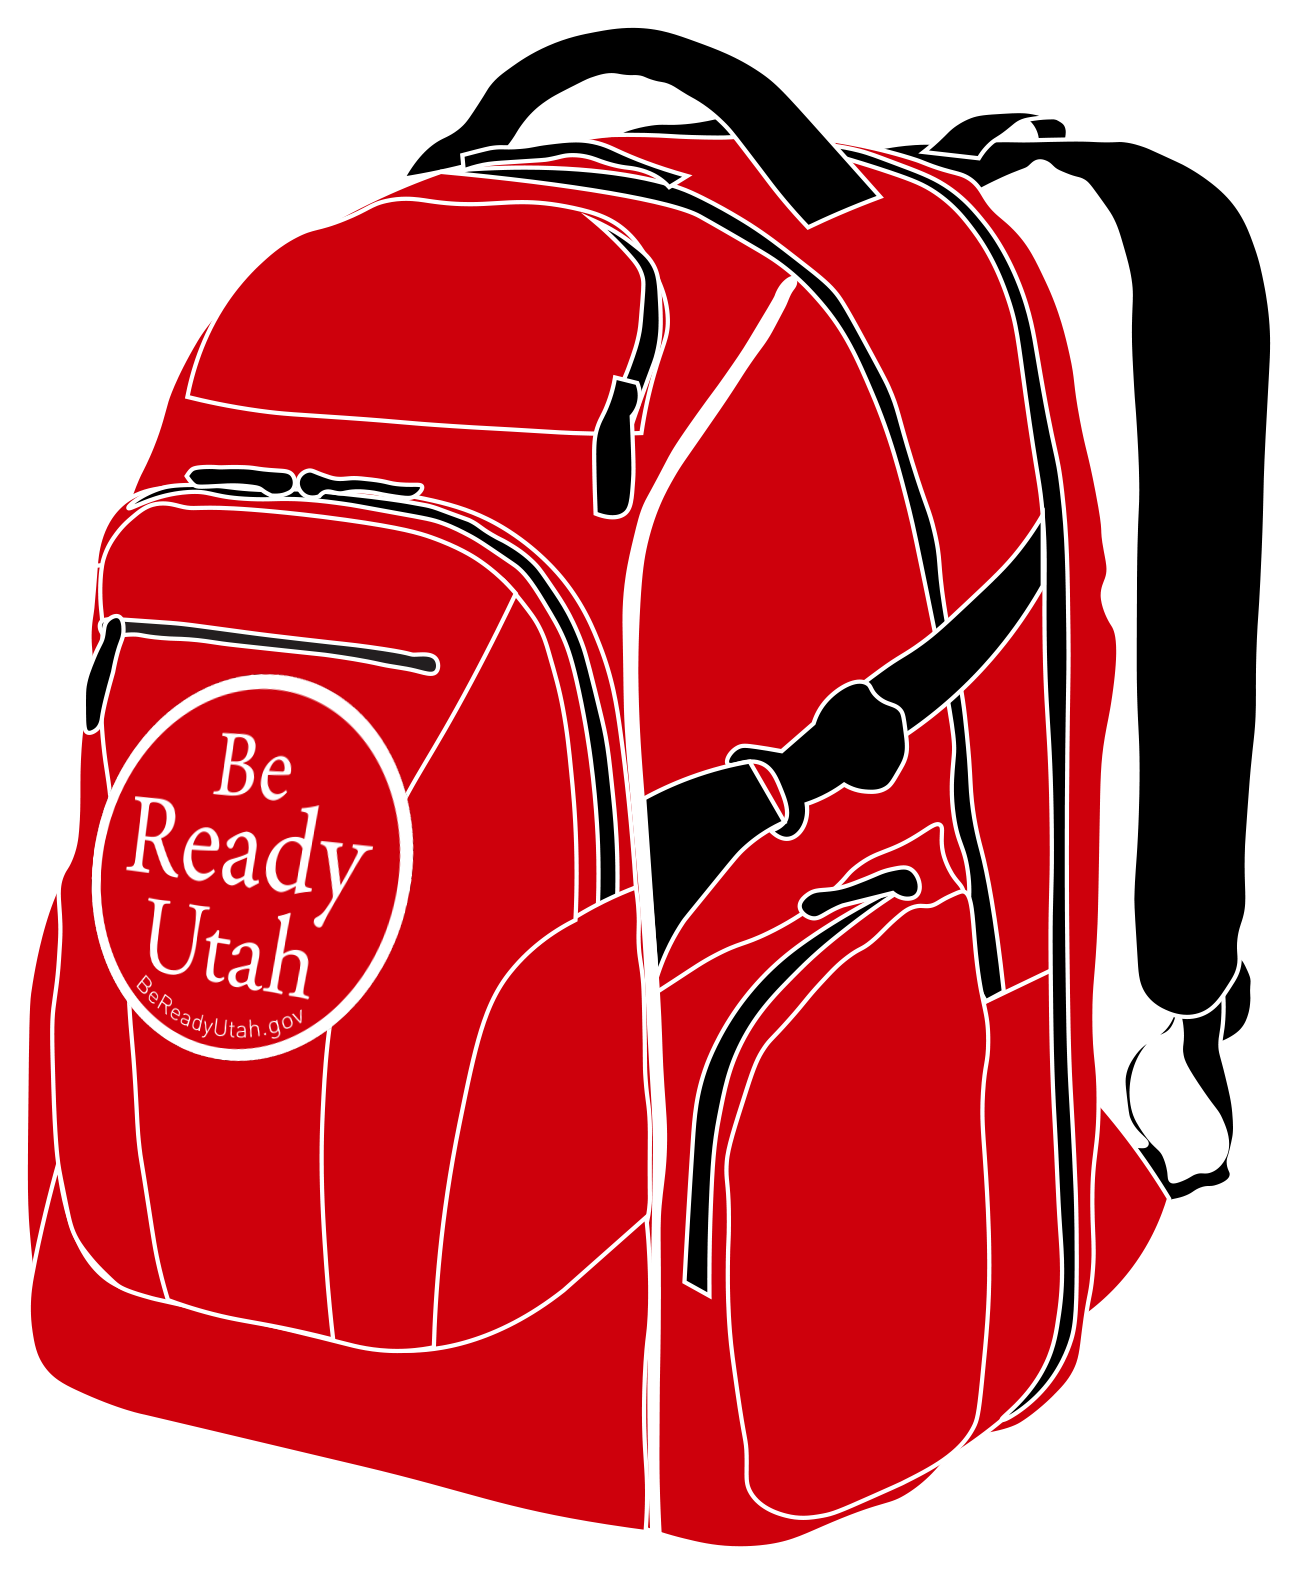 Red Be Ready Utah Backpack representing a disaster supply kit